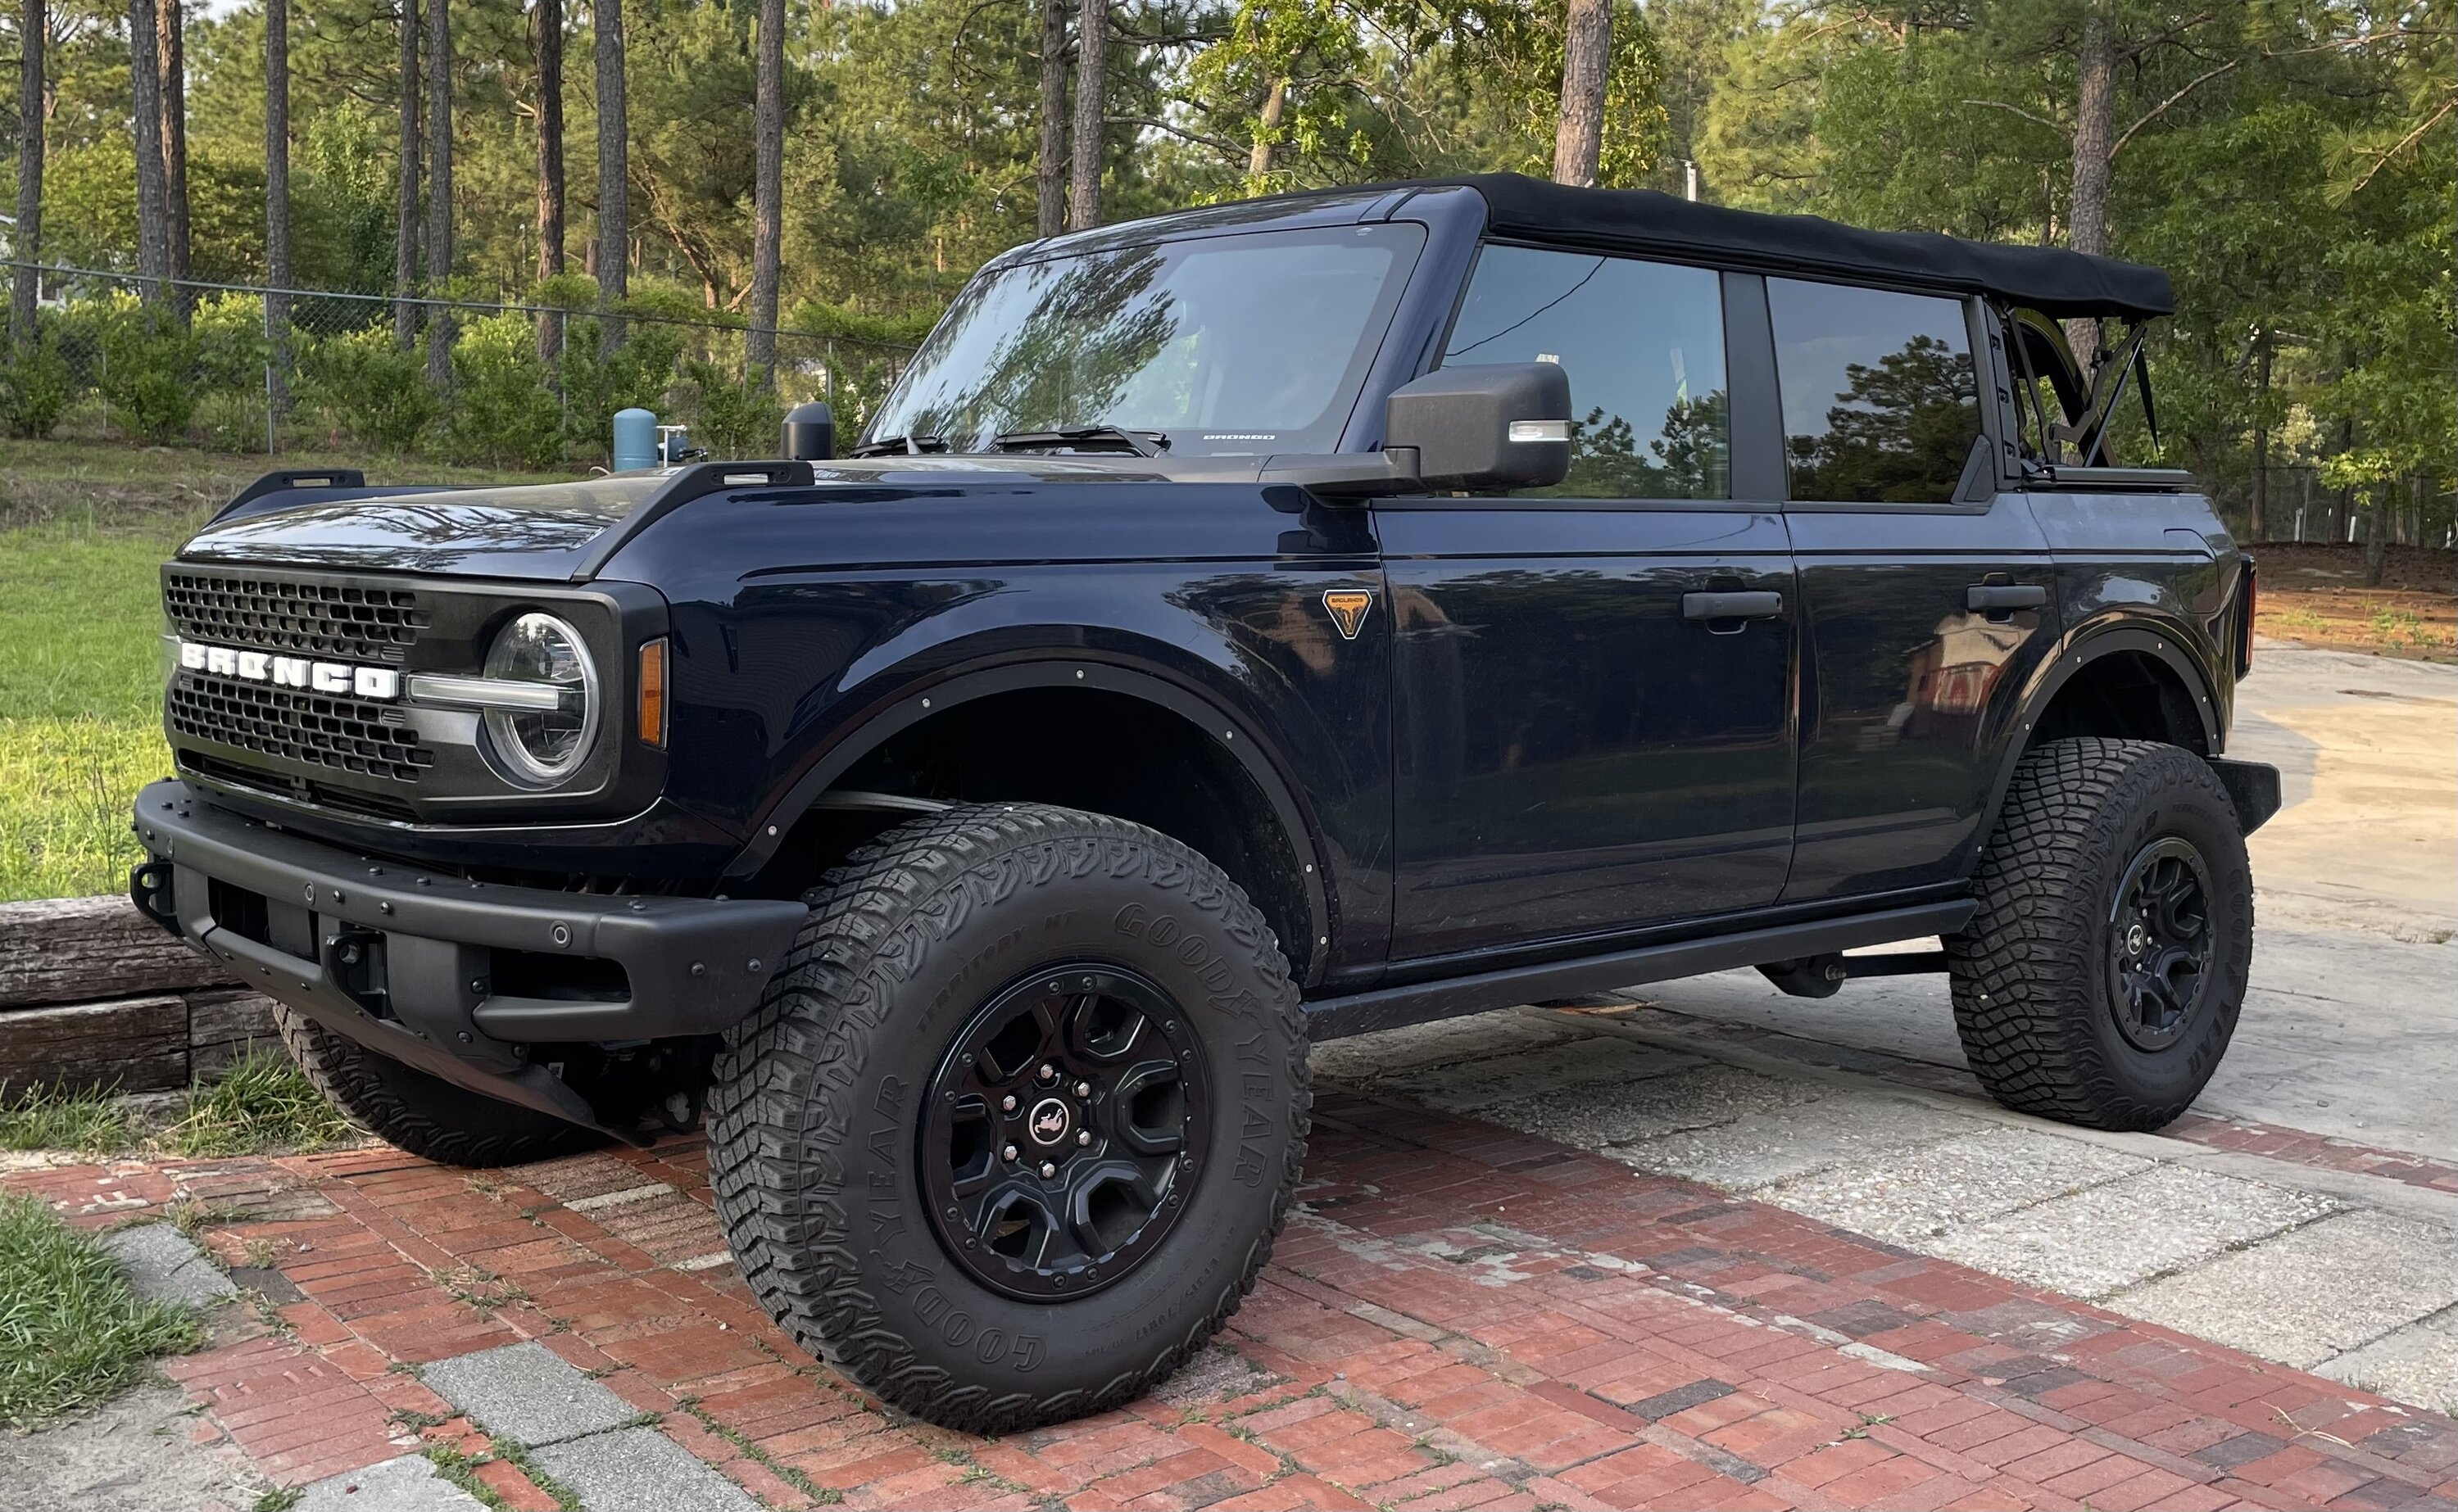 Ford Bronco Fender Flare Deletes - who has done it? 3F677542-D95D-42C5-AC9B-356B2D0B4991